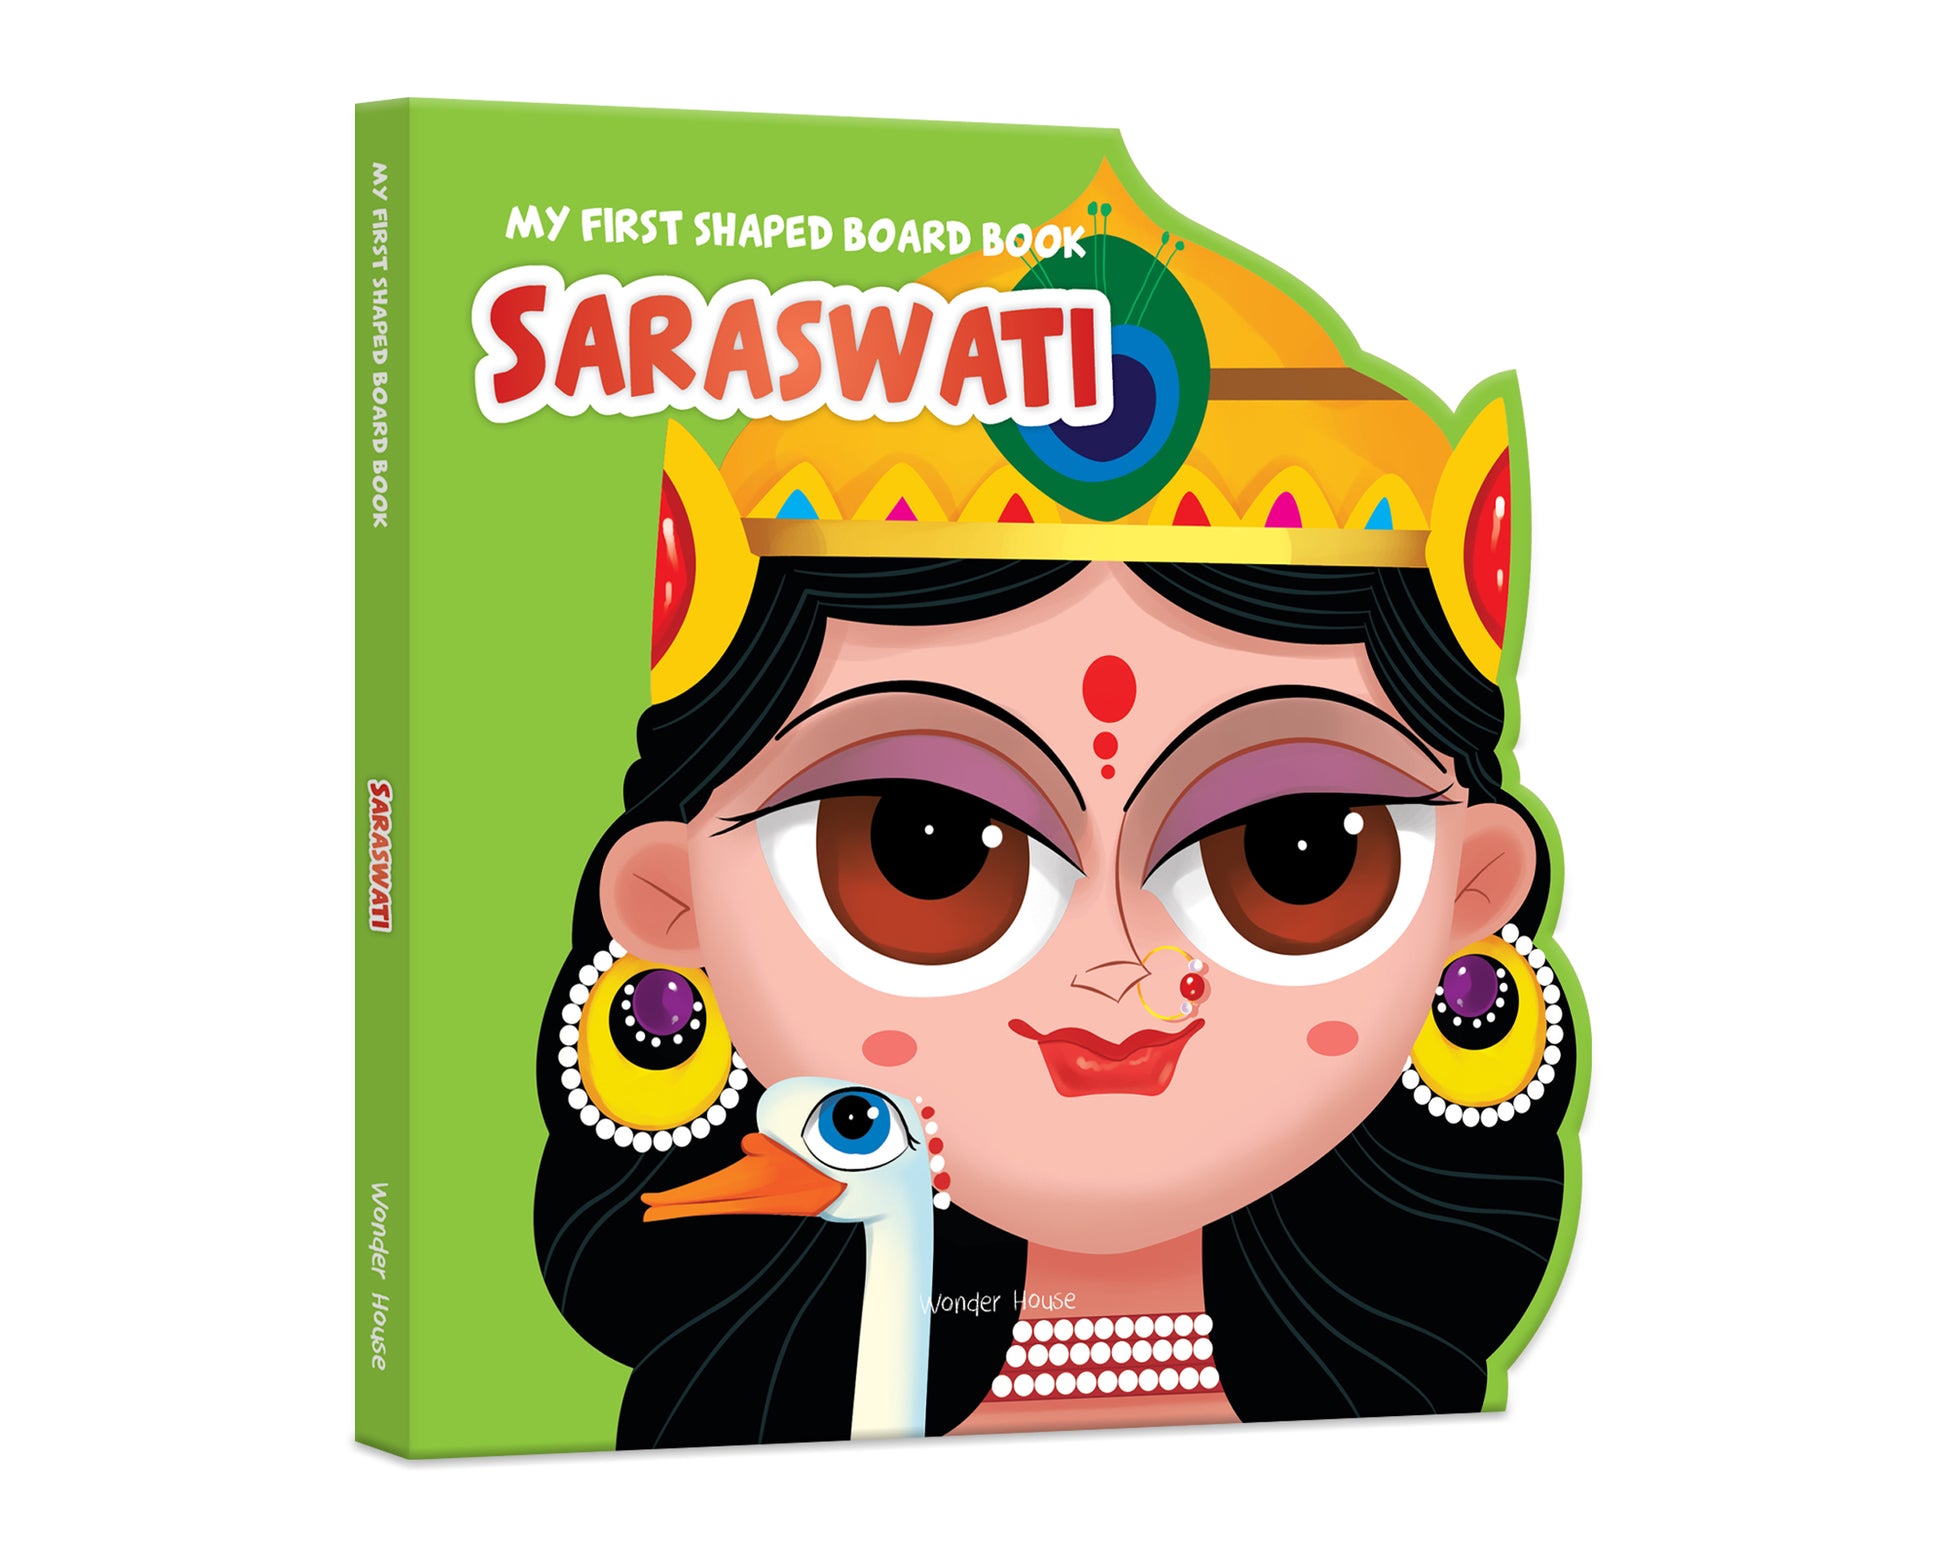 My First Shaped Board Book: Illustrated Saraswati Hindu Mythology Picture Book for Kids Age 2+ (Indian Gods and Goddesses)